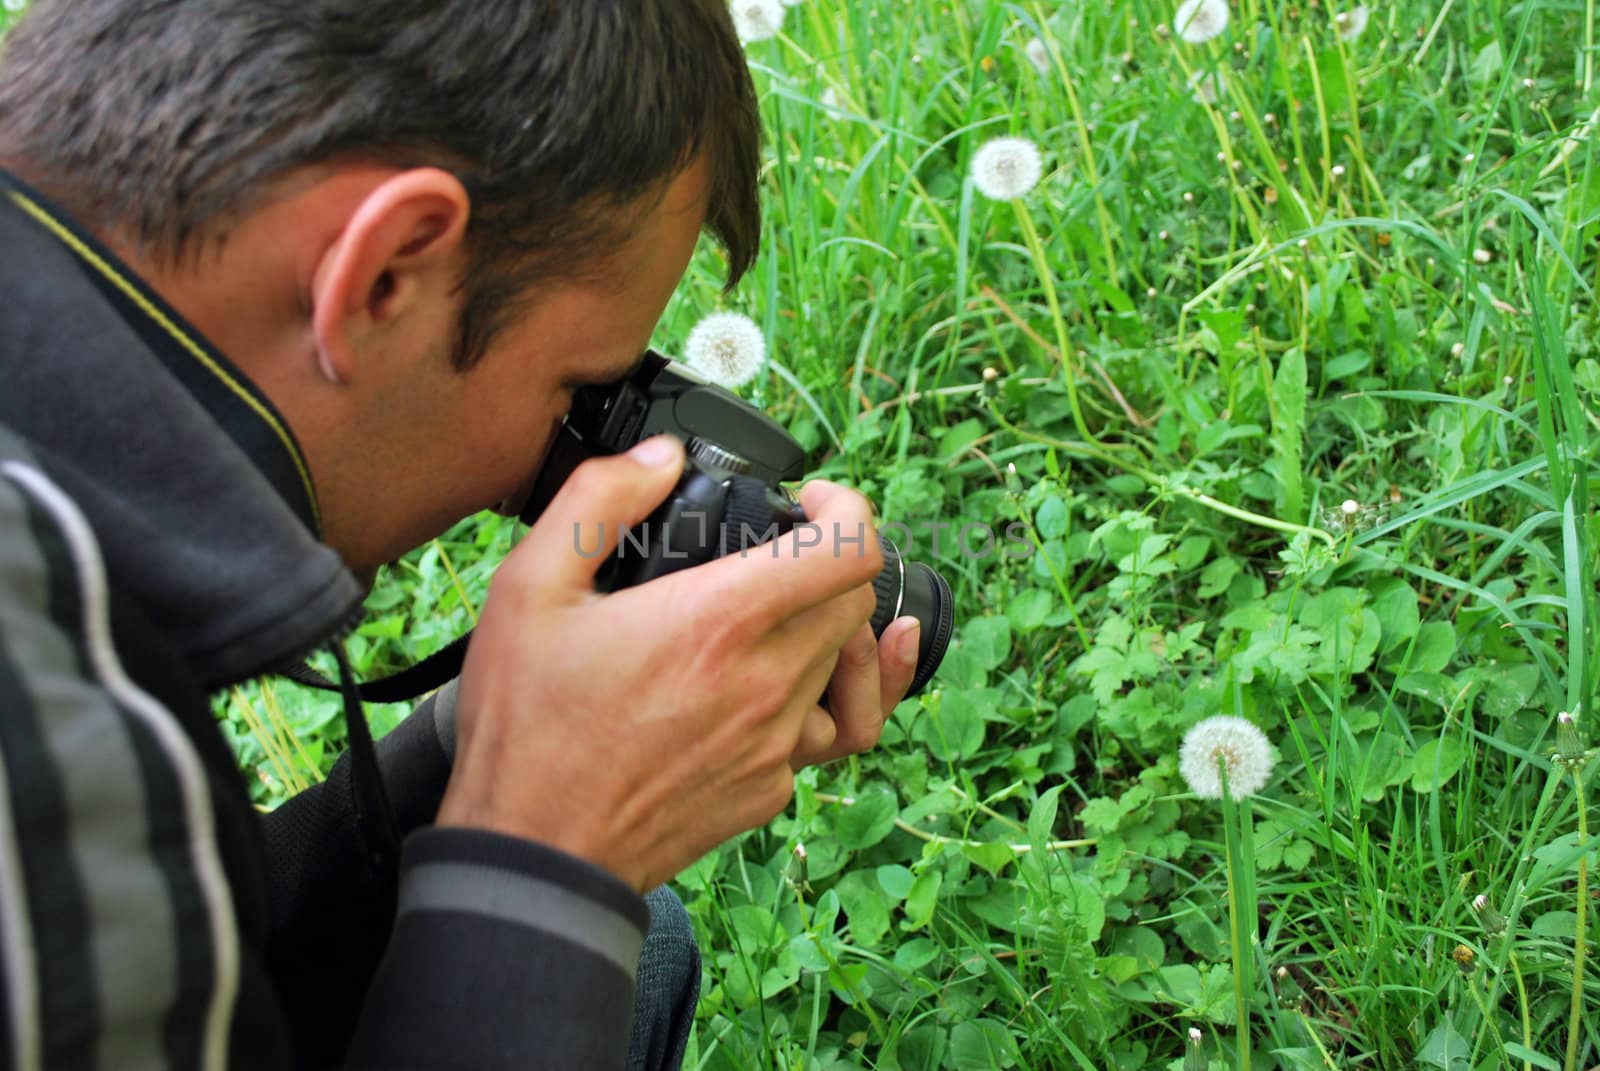 photographer pointing his camera to several dandelions